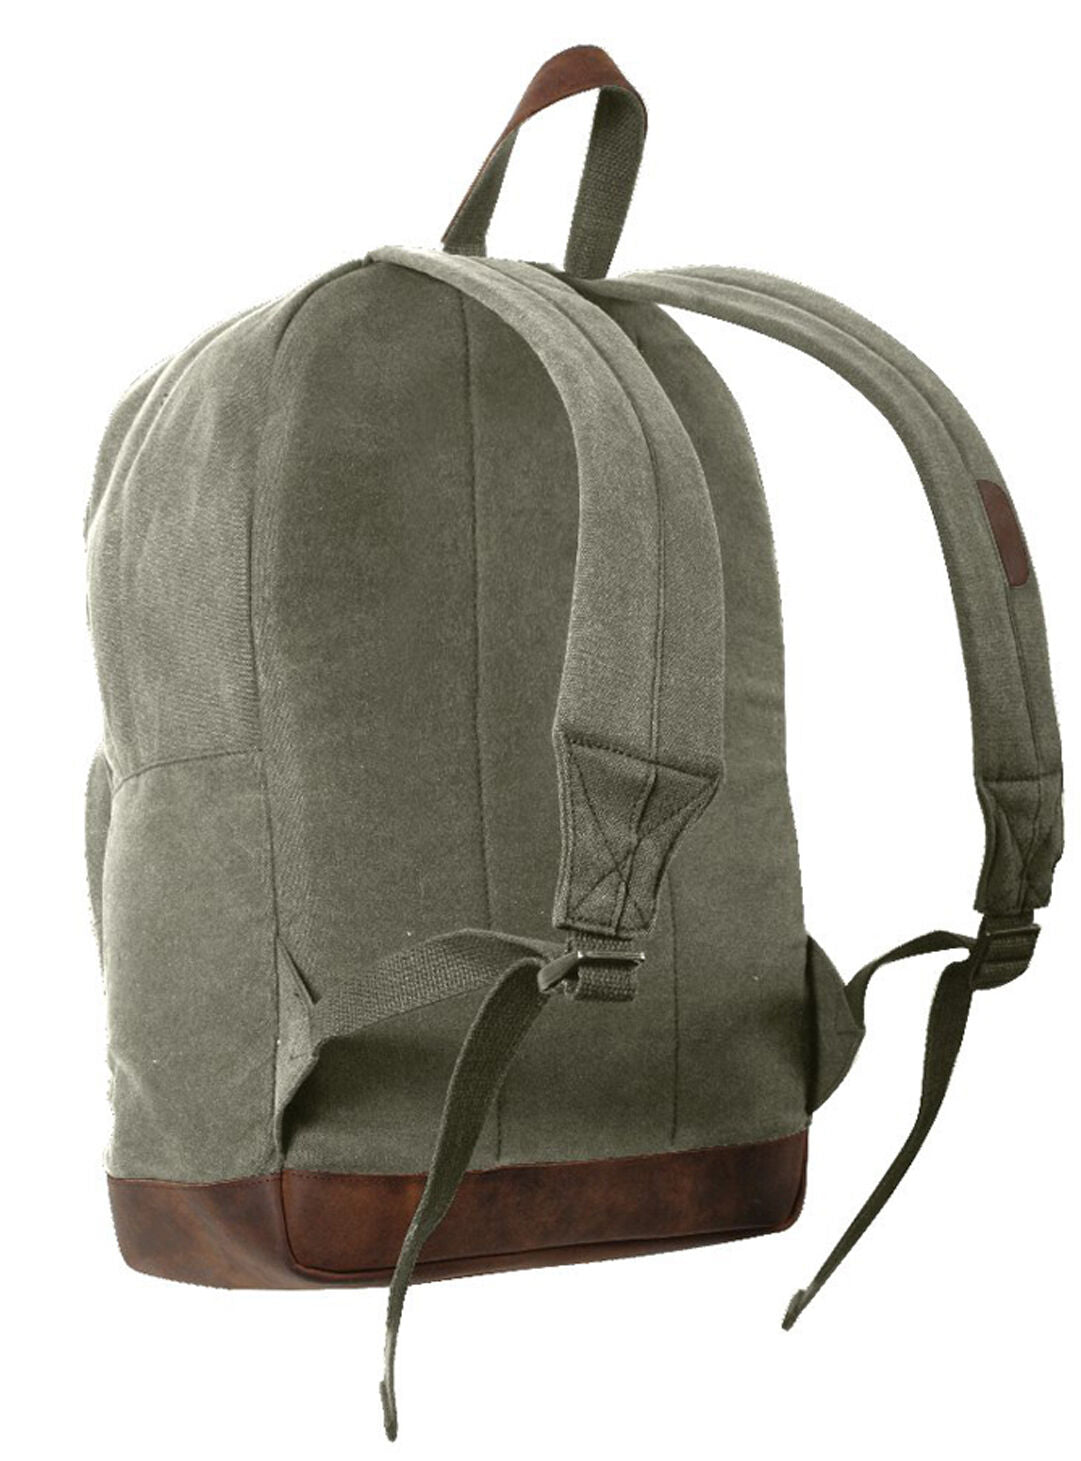 Rothco Vintage Canvas Teardrop Backpack With Leather Accents